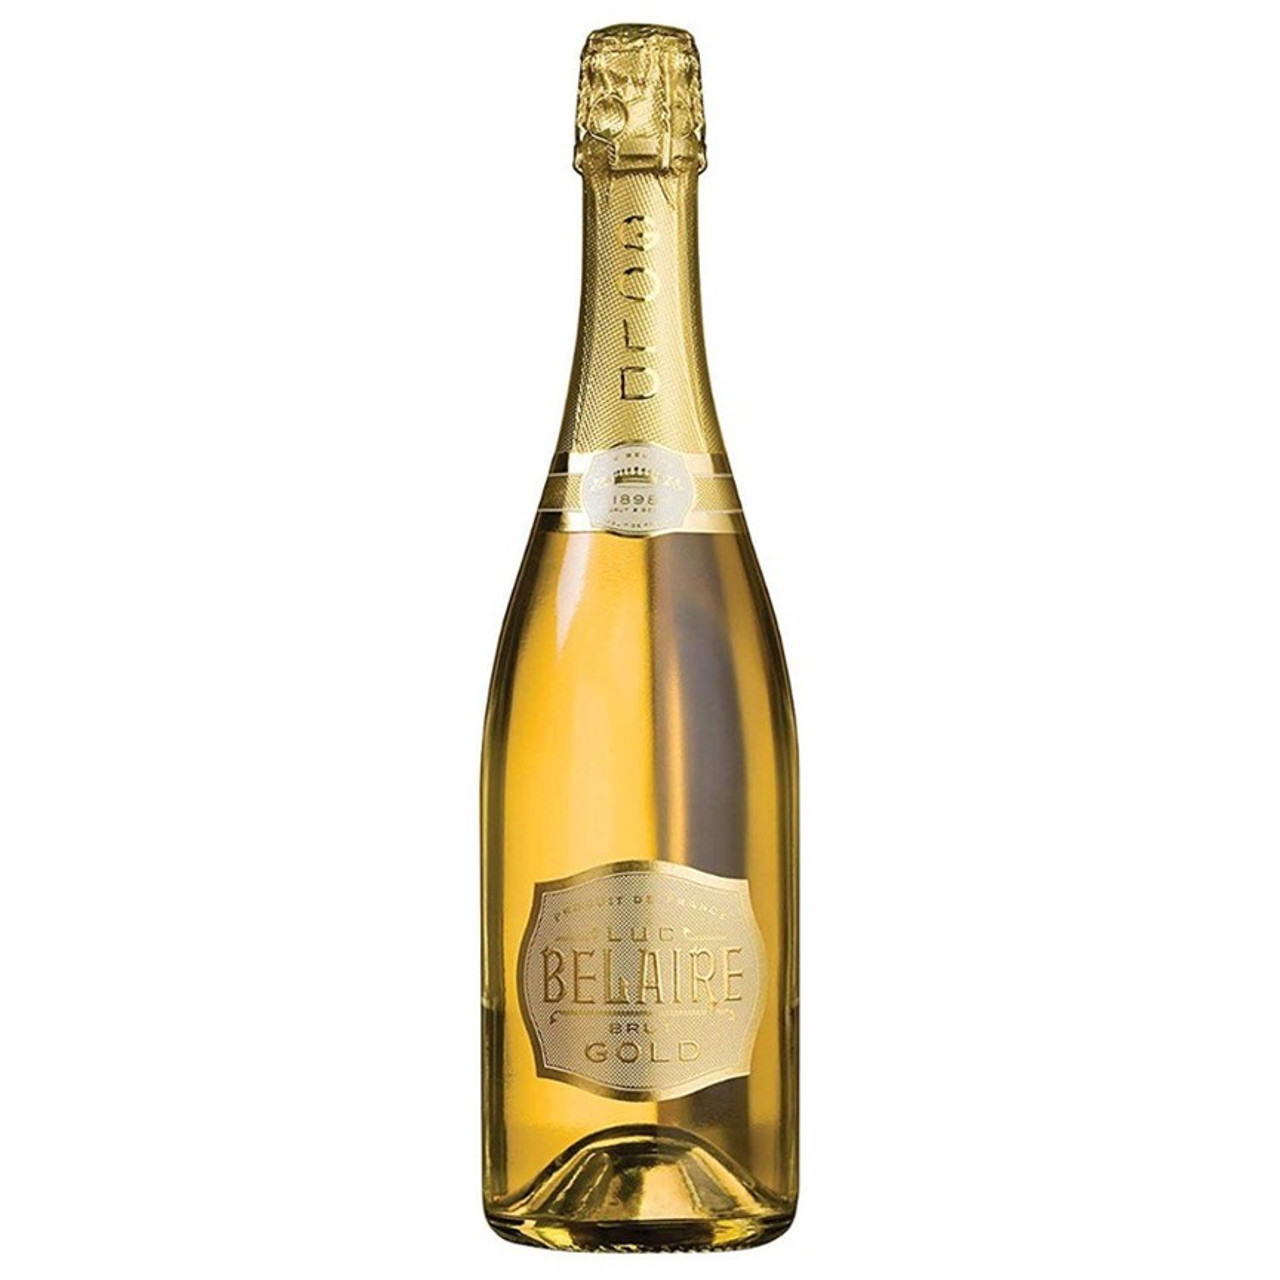 Luc Belaire Rose, France - 750 ml